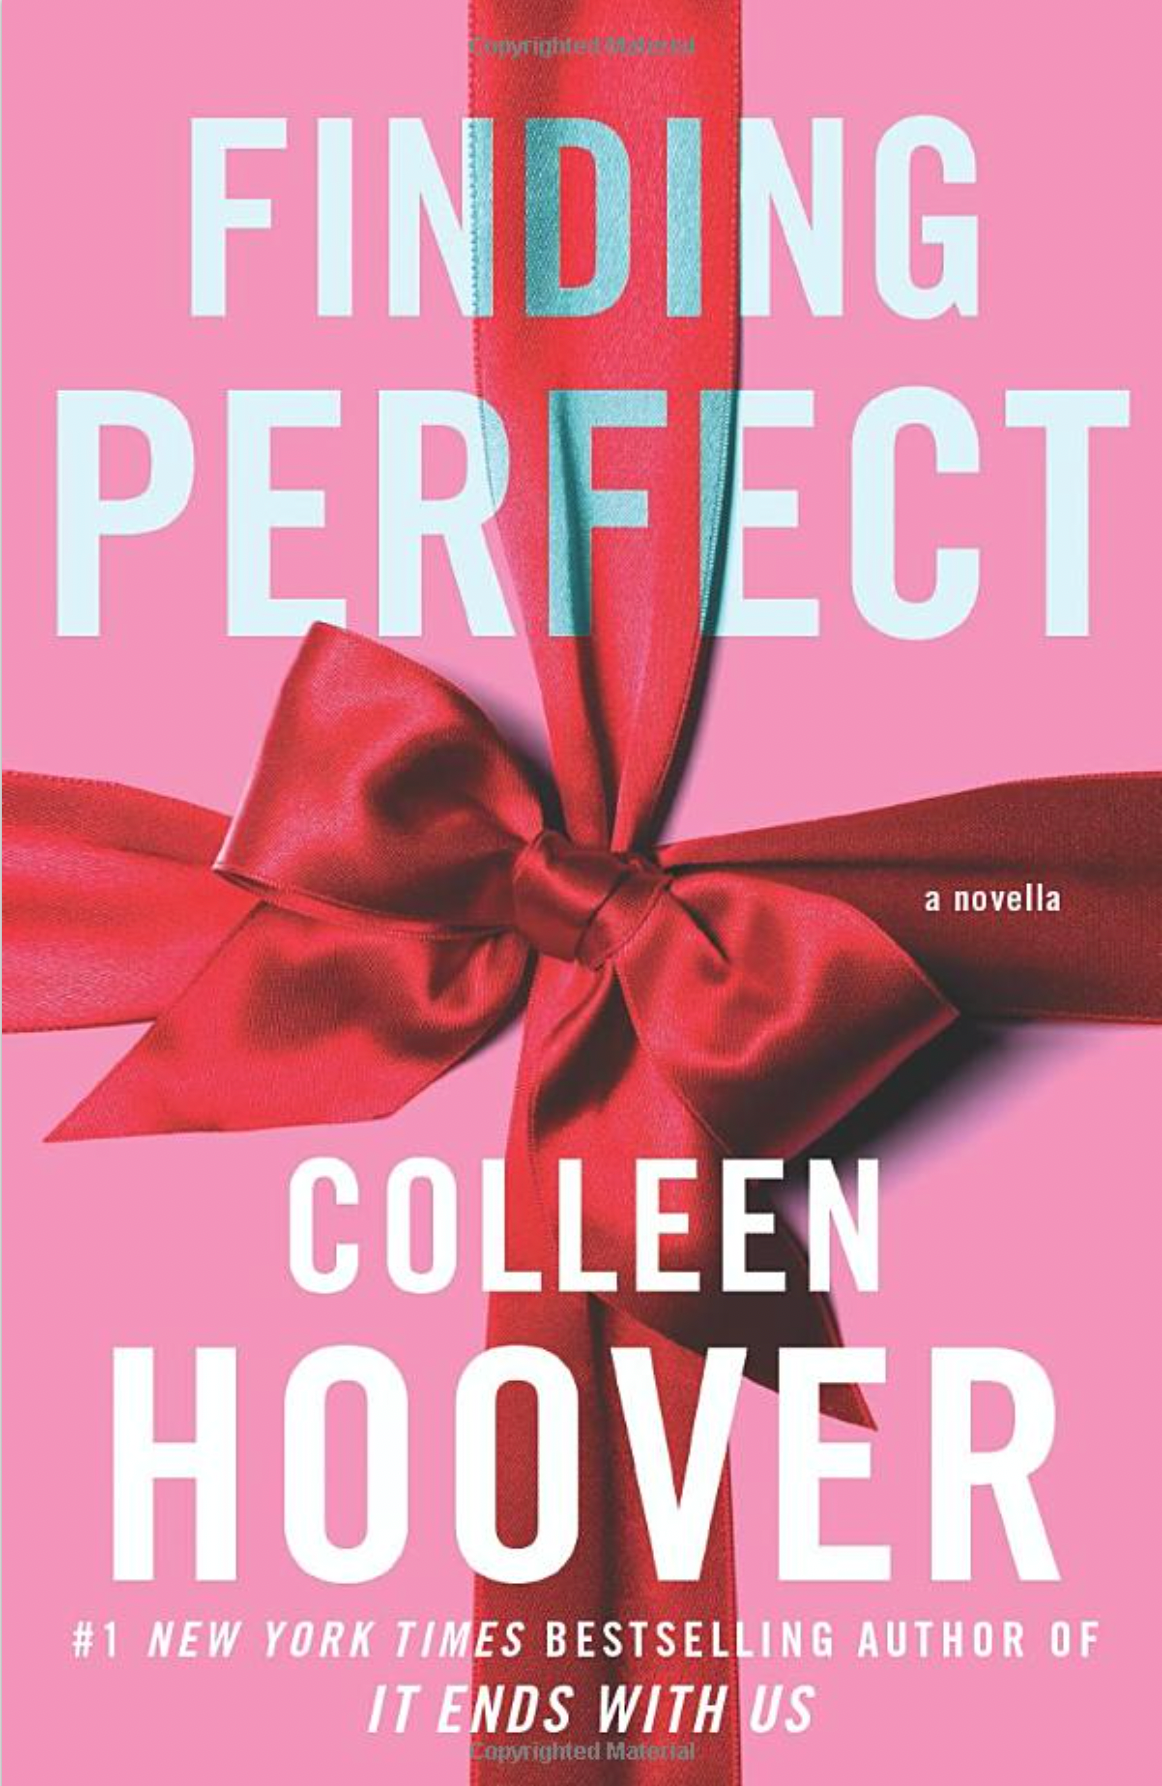 FINDING PERFECT BY COLLEEN HOOVER PAPERBACK – River Birch Gifts